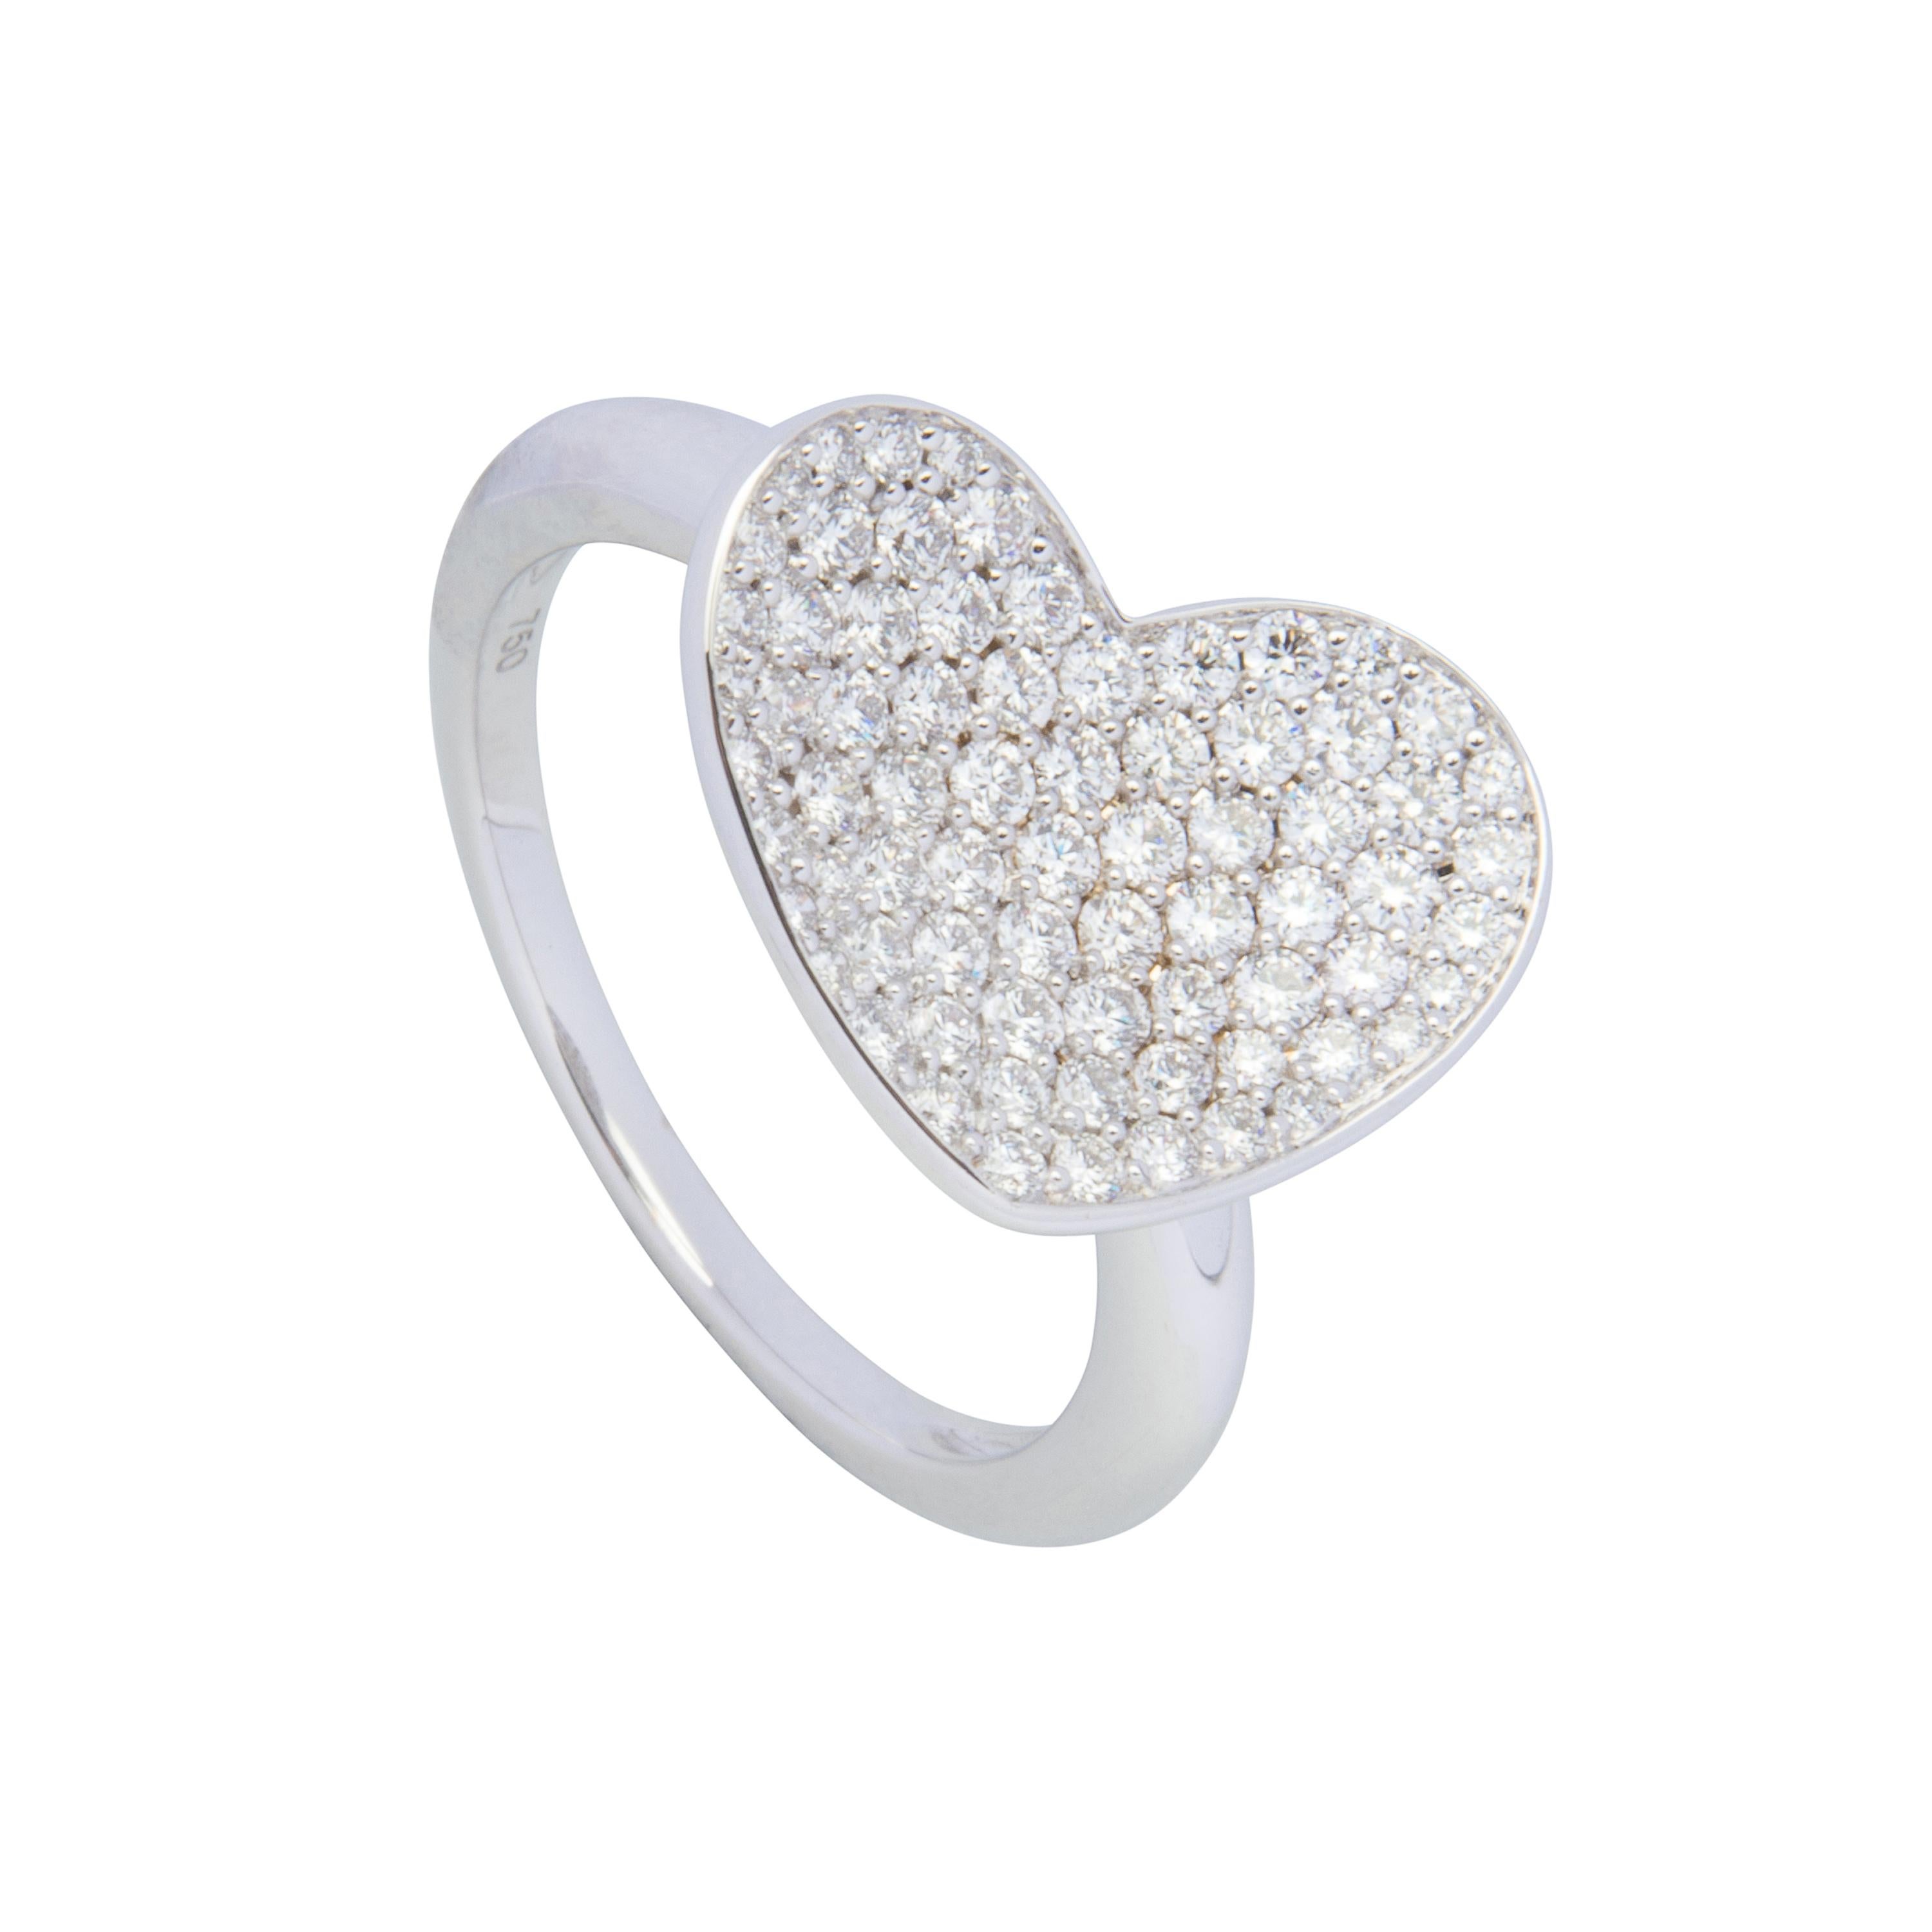 18 karat white gold heart ring set with pave diamonds totalling 0.73ct.  Size US5.5, sizeable +2 or -2.